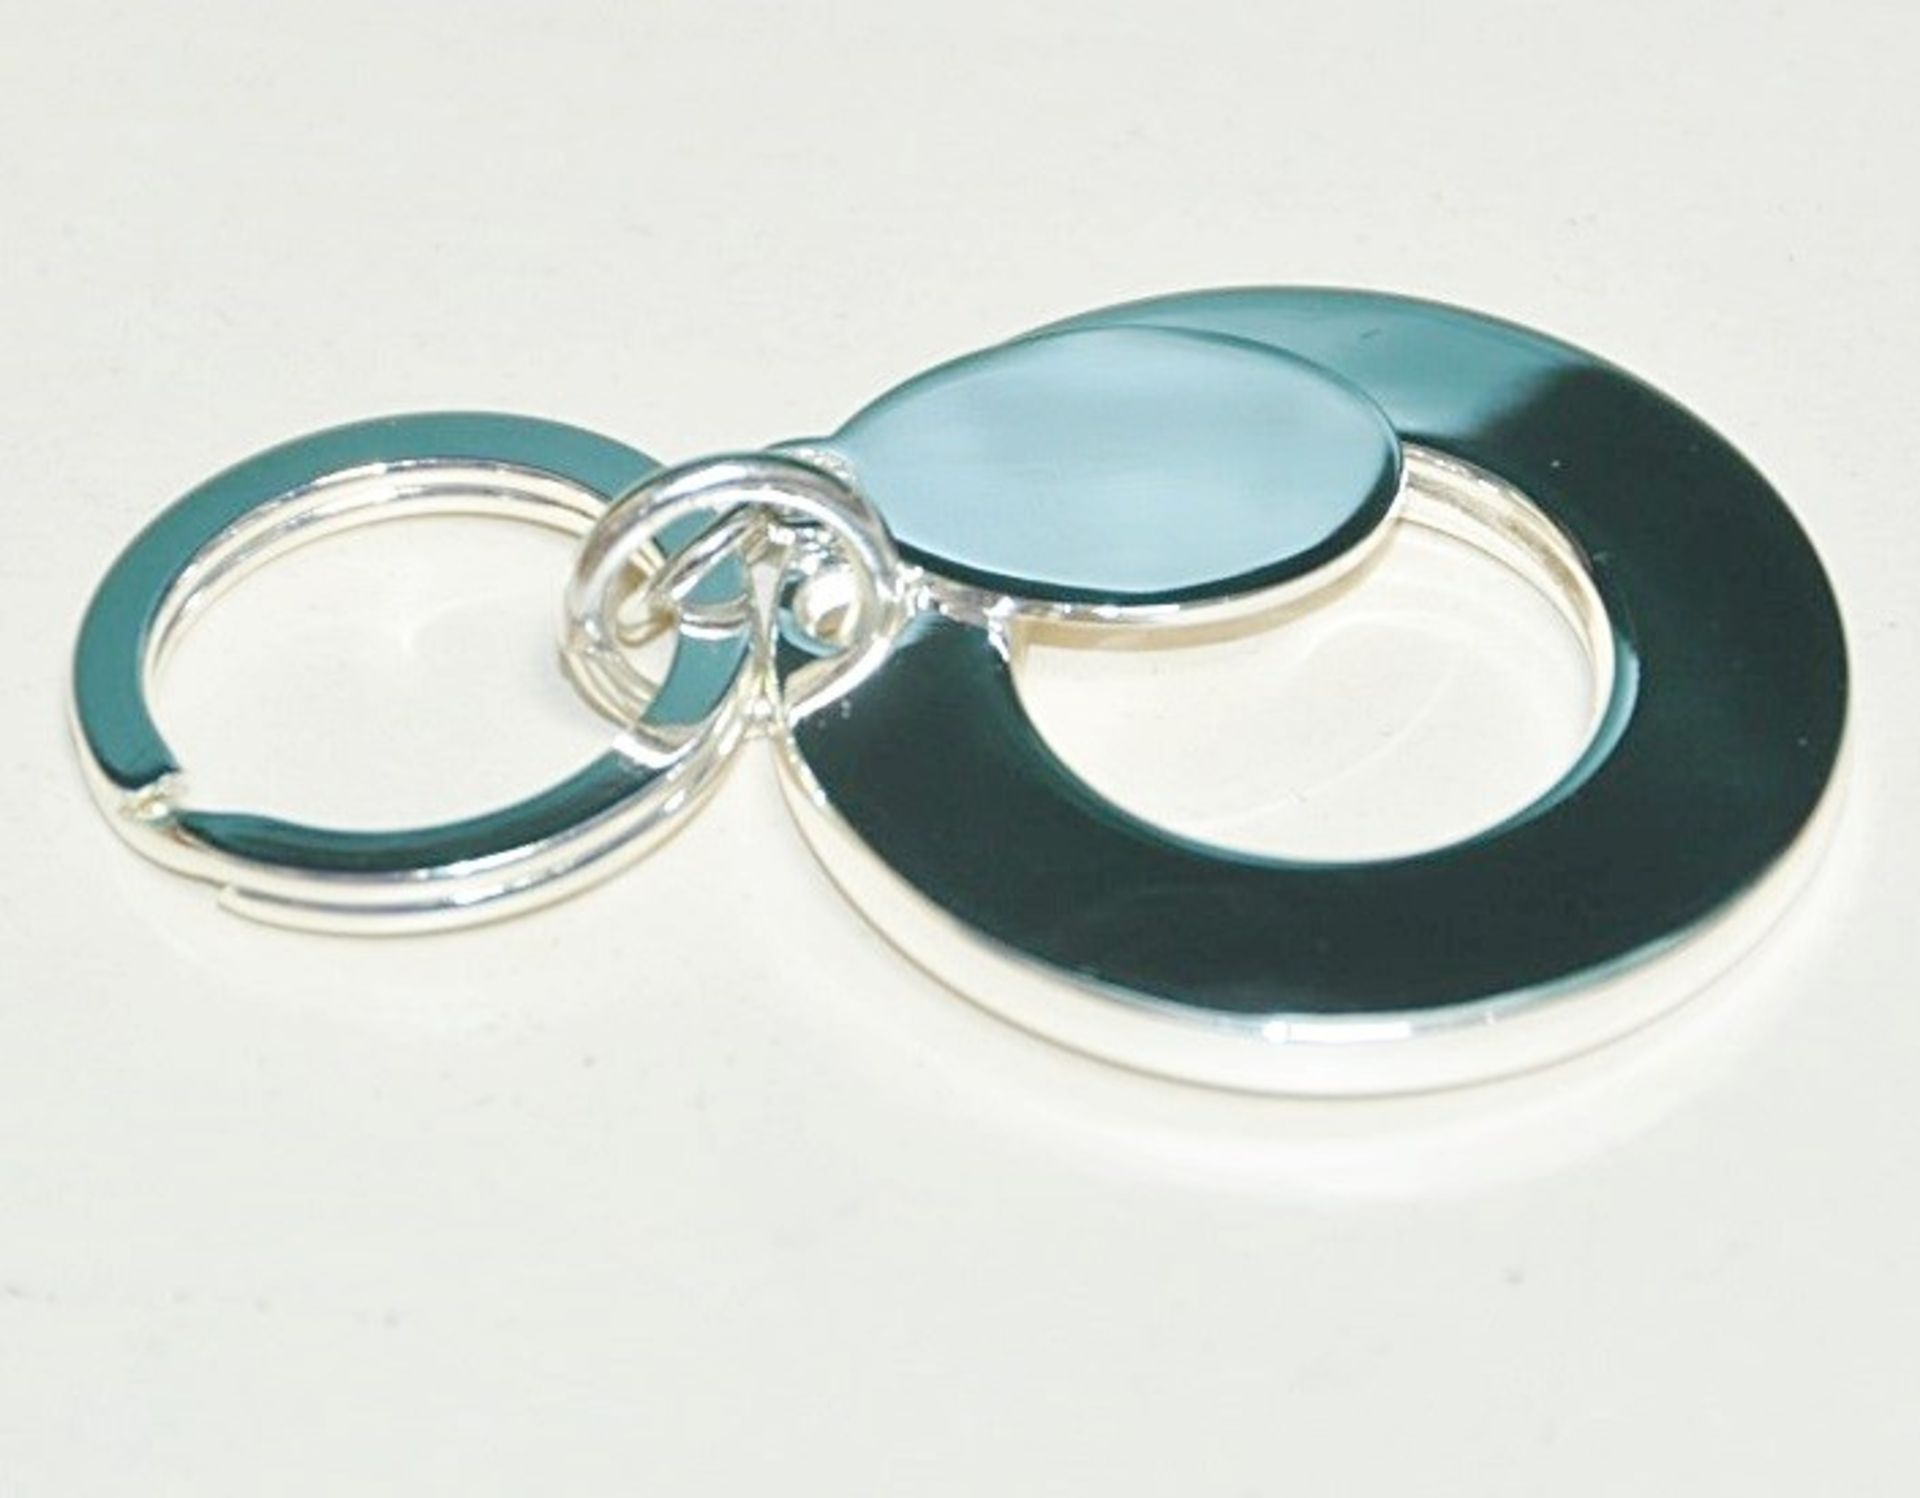 10 x Silver Plated Key Rings By ICE London - Design: SOLAR - MADE WITH "SWAROVSKI¨ ELEMENTS - Luxury - Image 4 of 6